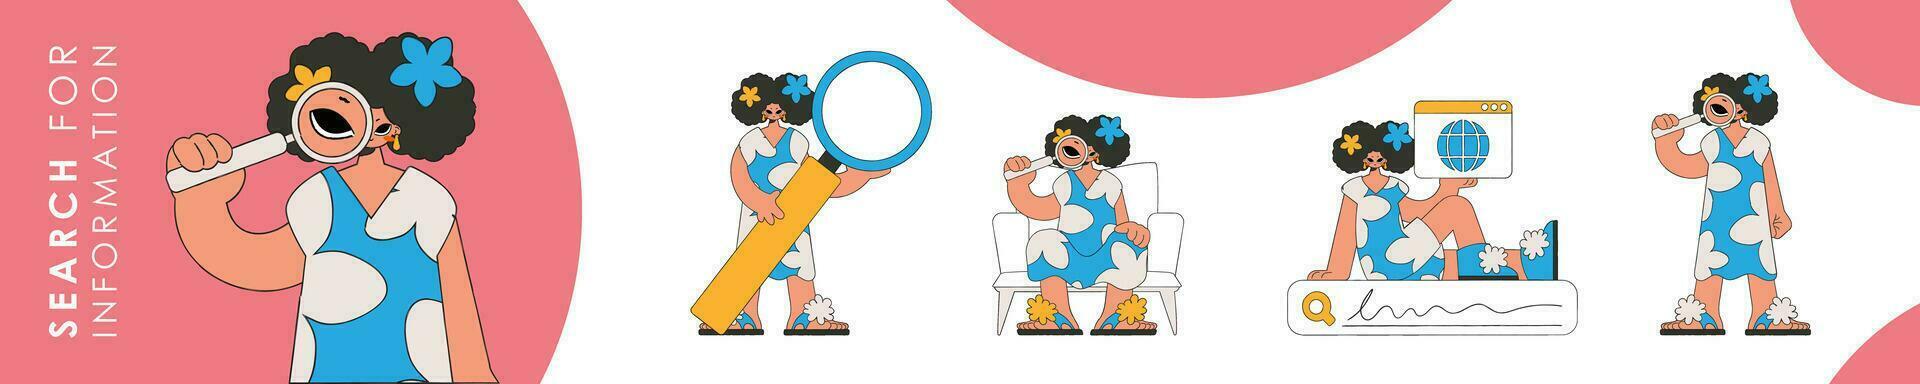 Set of character illustration for the topic of searching for information on the Internet. Collection of scenes with a girl holding a magnifying glass and looking for information. vector